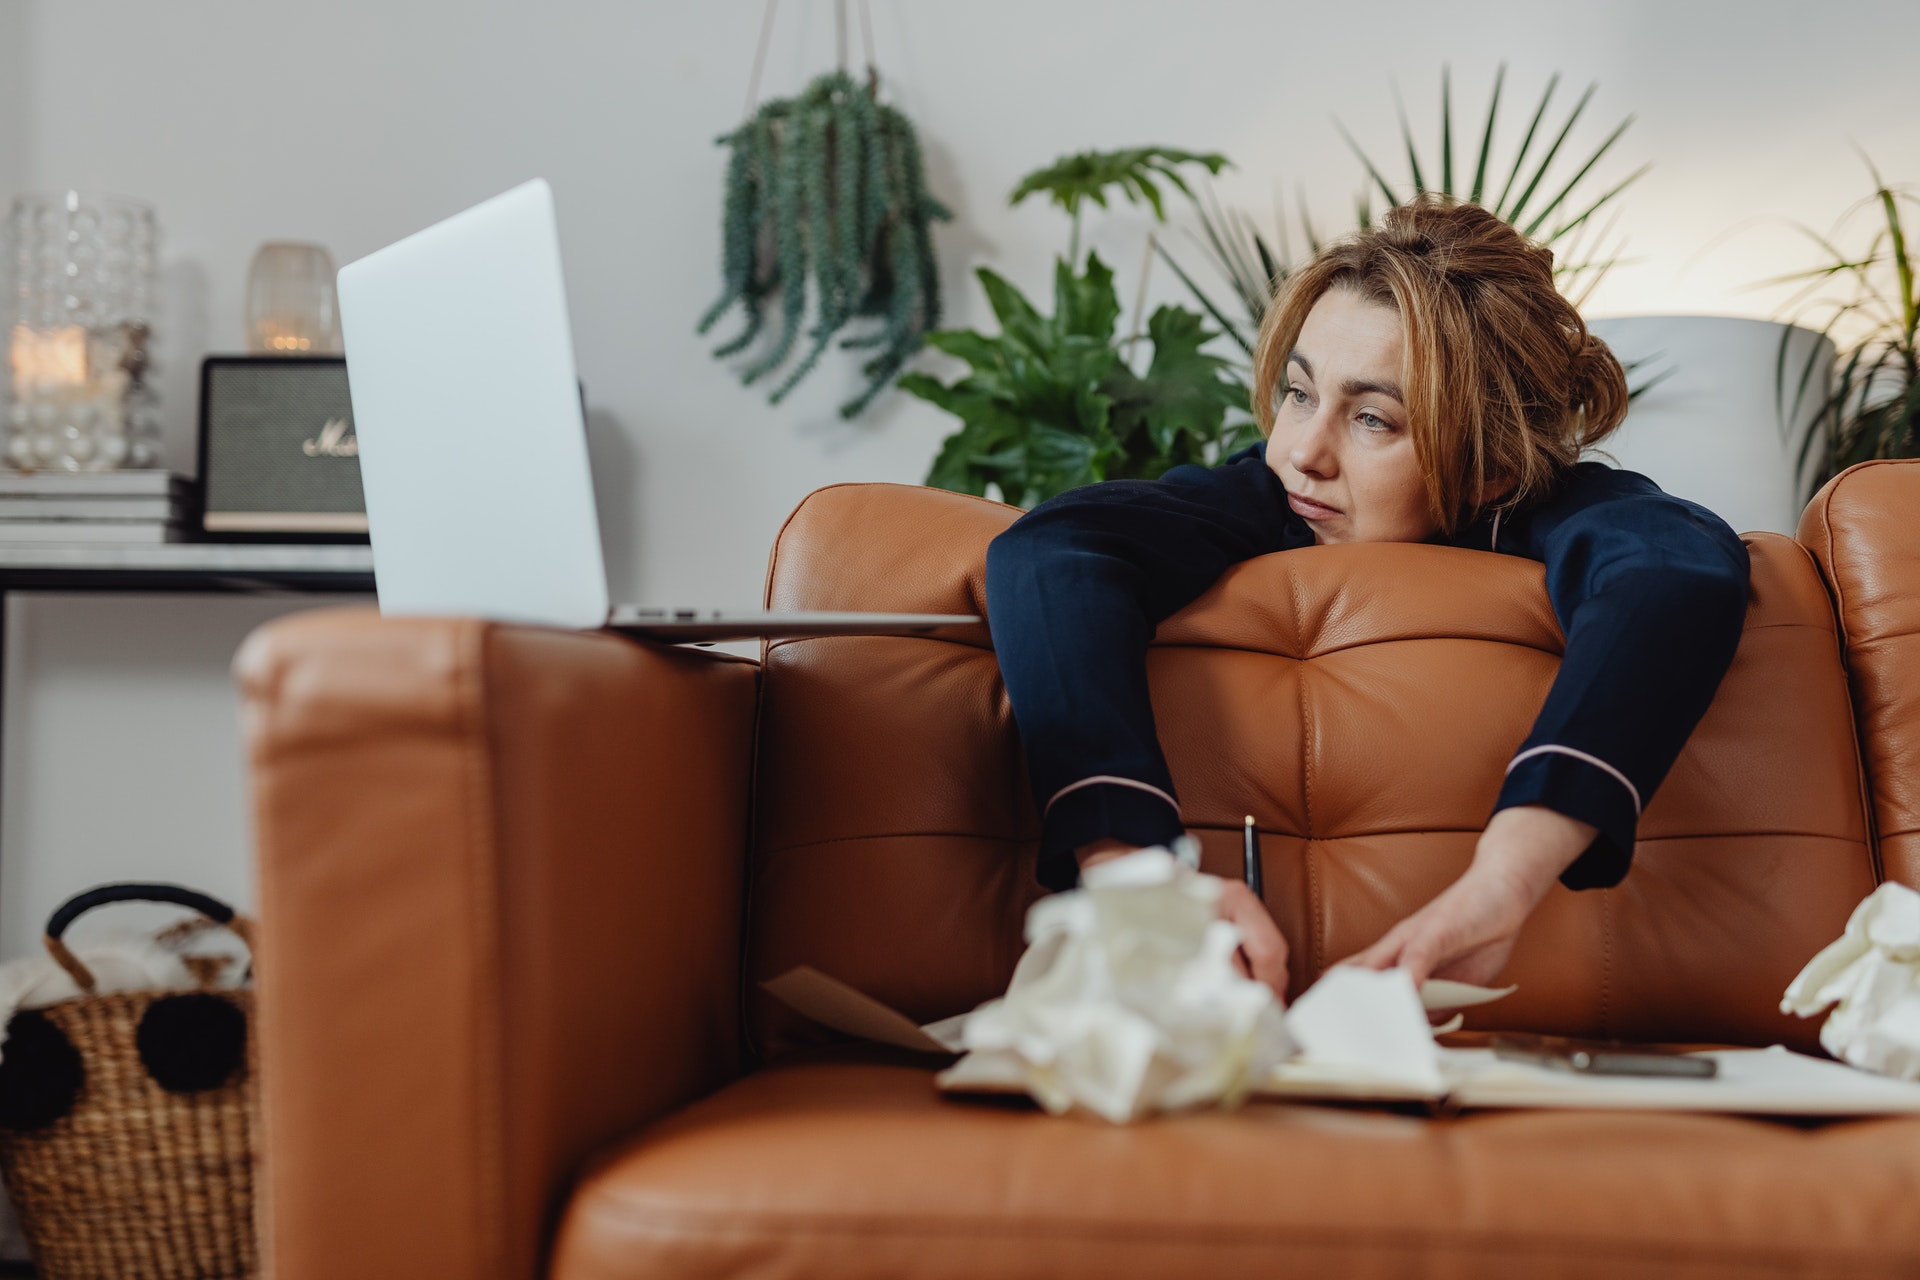 a laptop sits on the arm of a leather chair and a woman is slumped over the back from behind the couch. She's staring at the laptop, stressed or bored. Crumpled papers surround her.